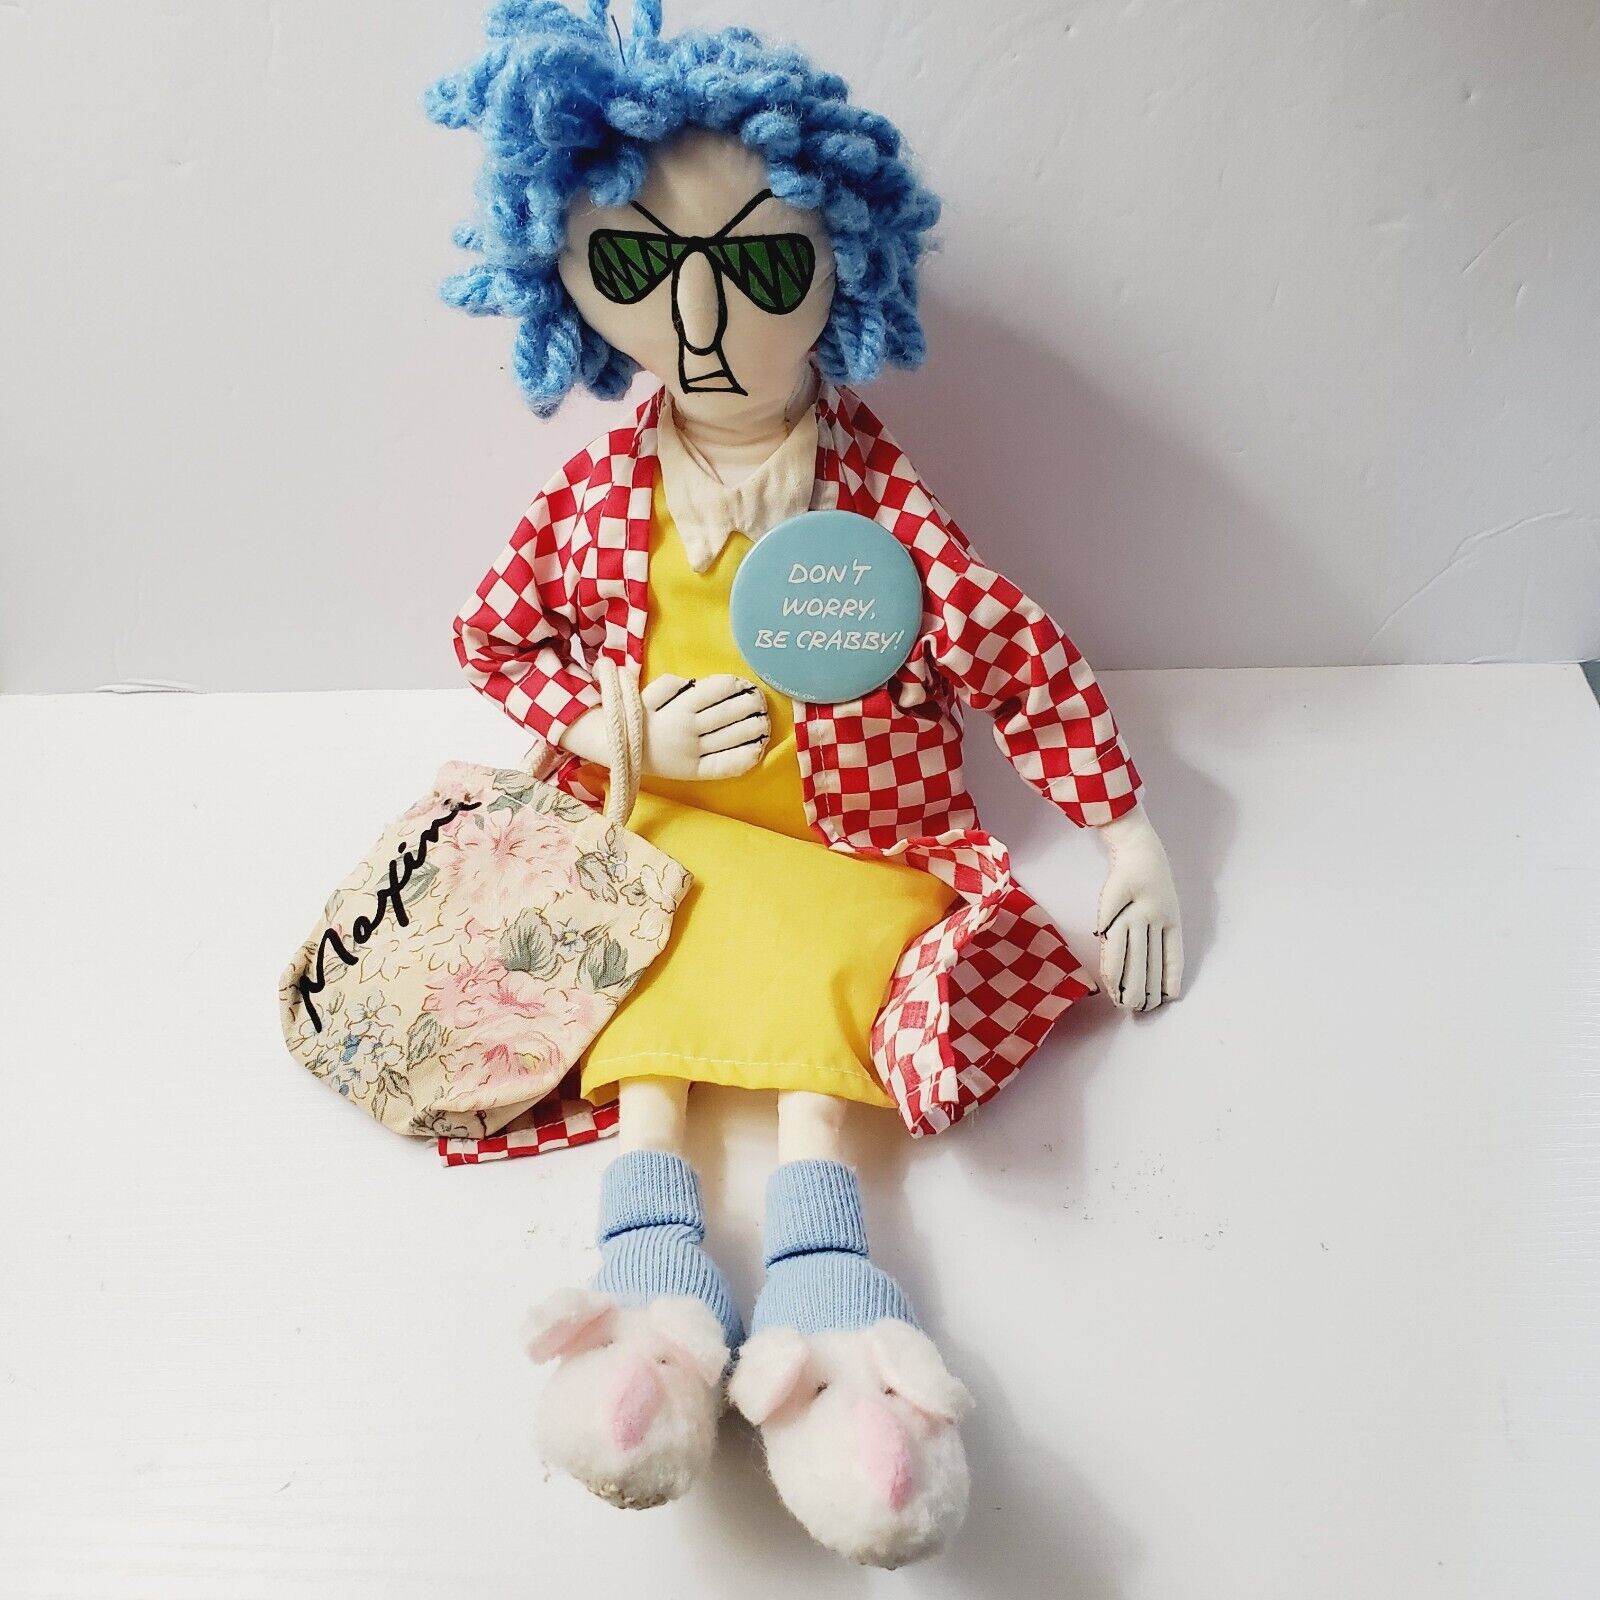 hallmark 1995 Vintage maxine Cloth doll With Pin Don’t Be Crabby 15”